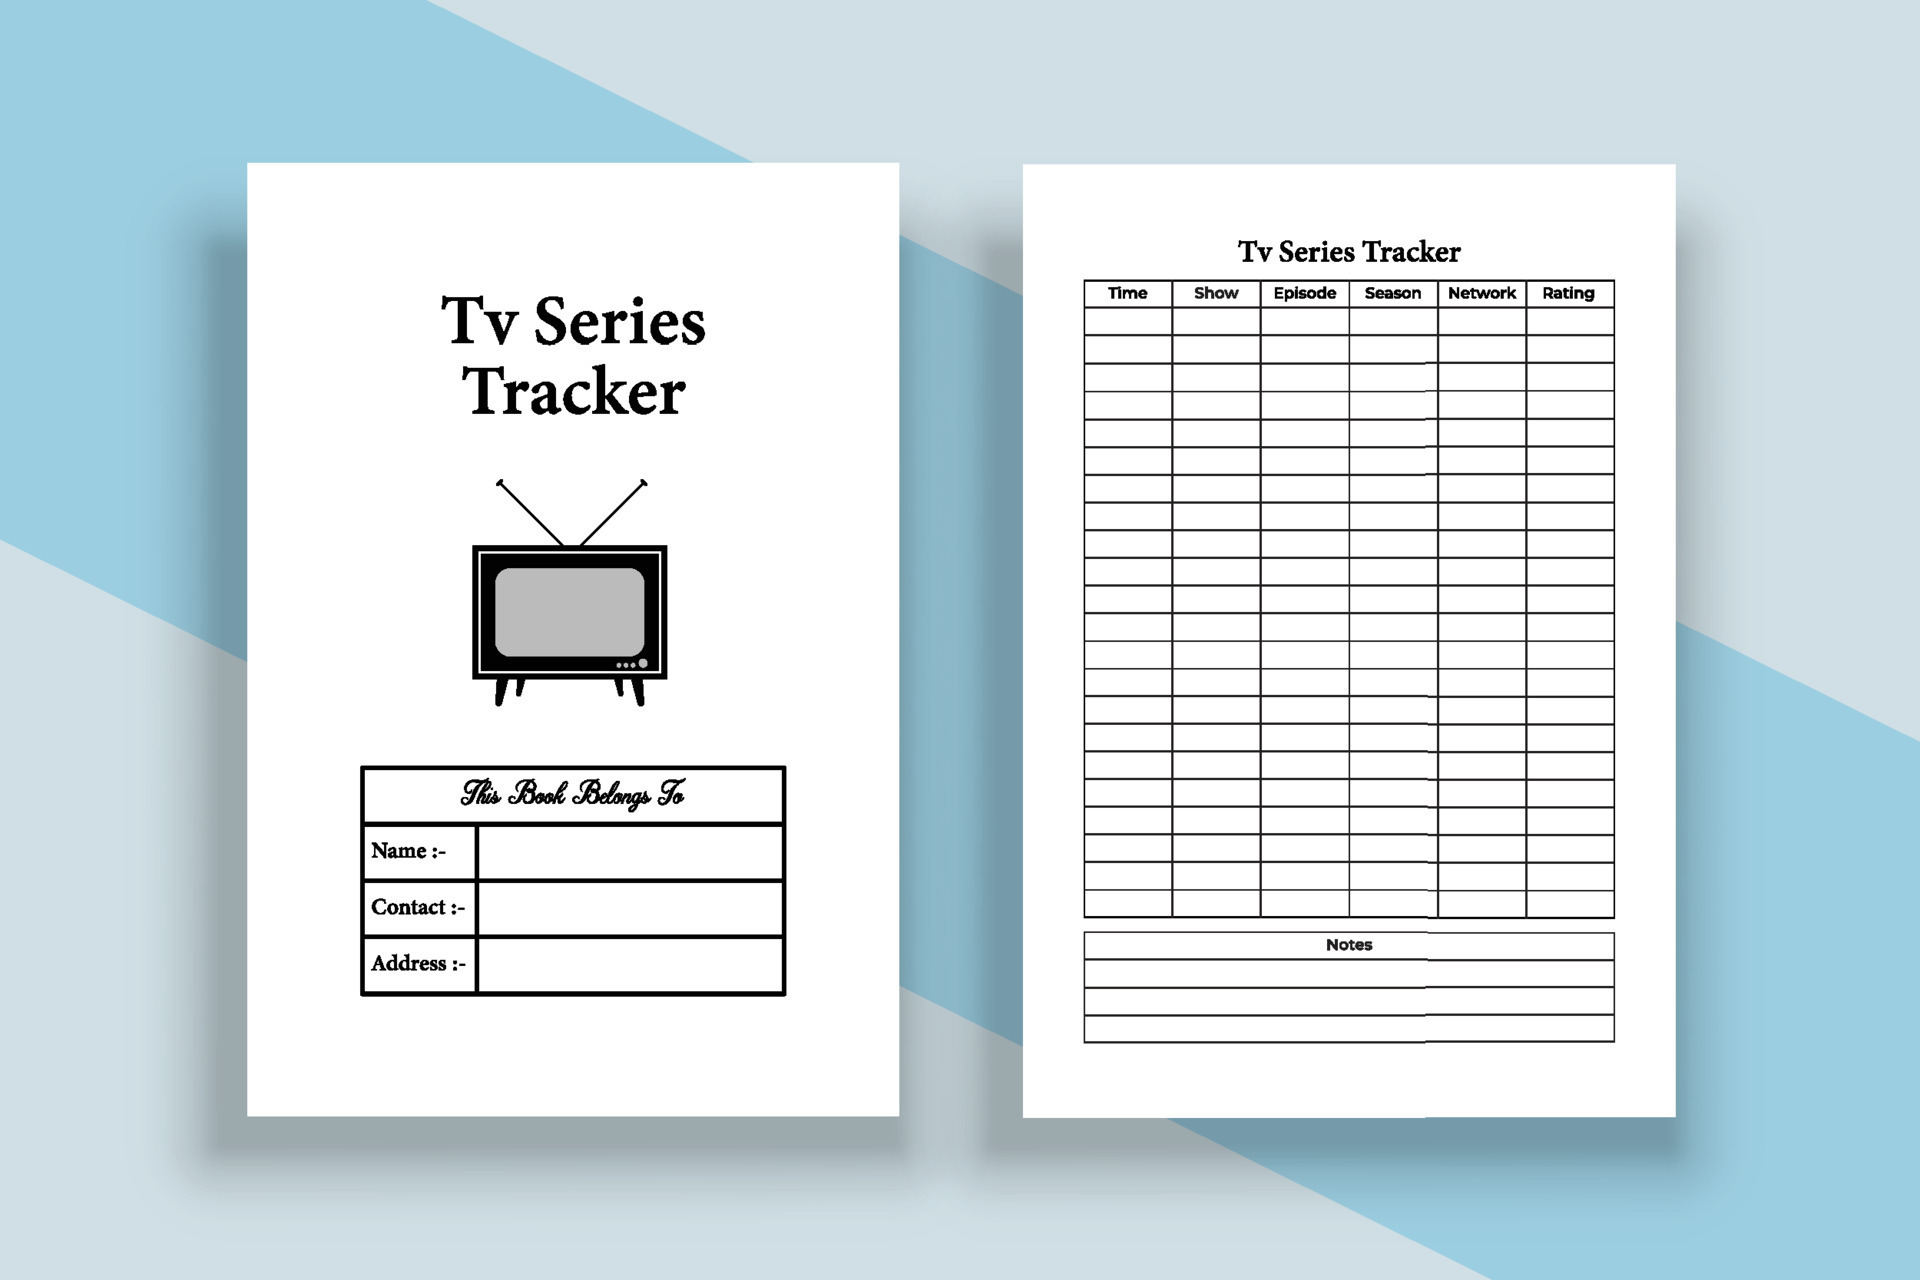 TV series tracker interior. Daily TV show information and episode